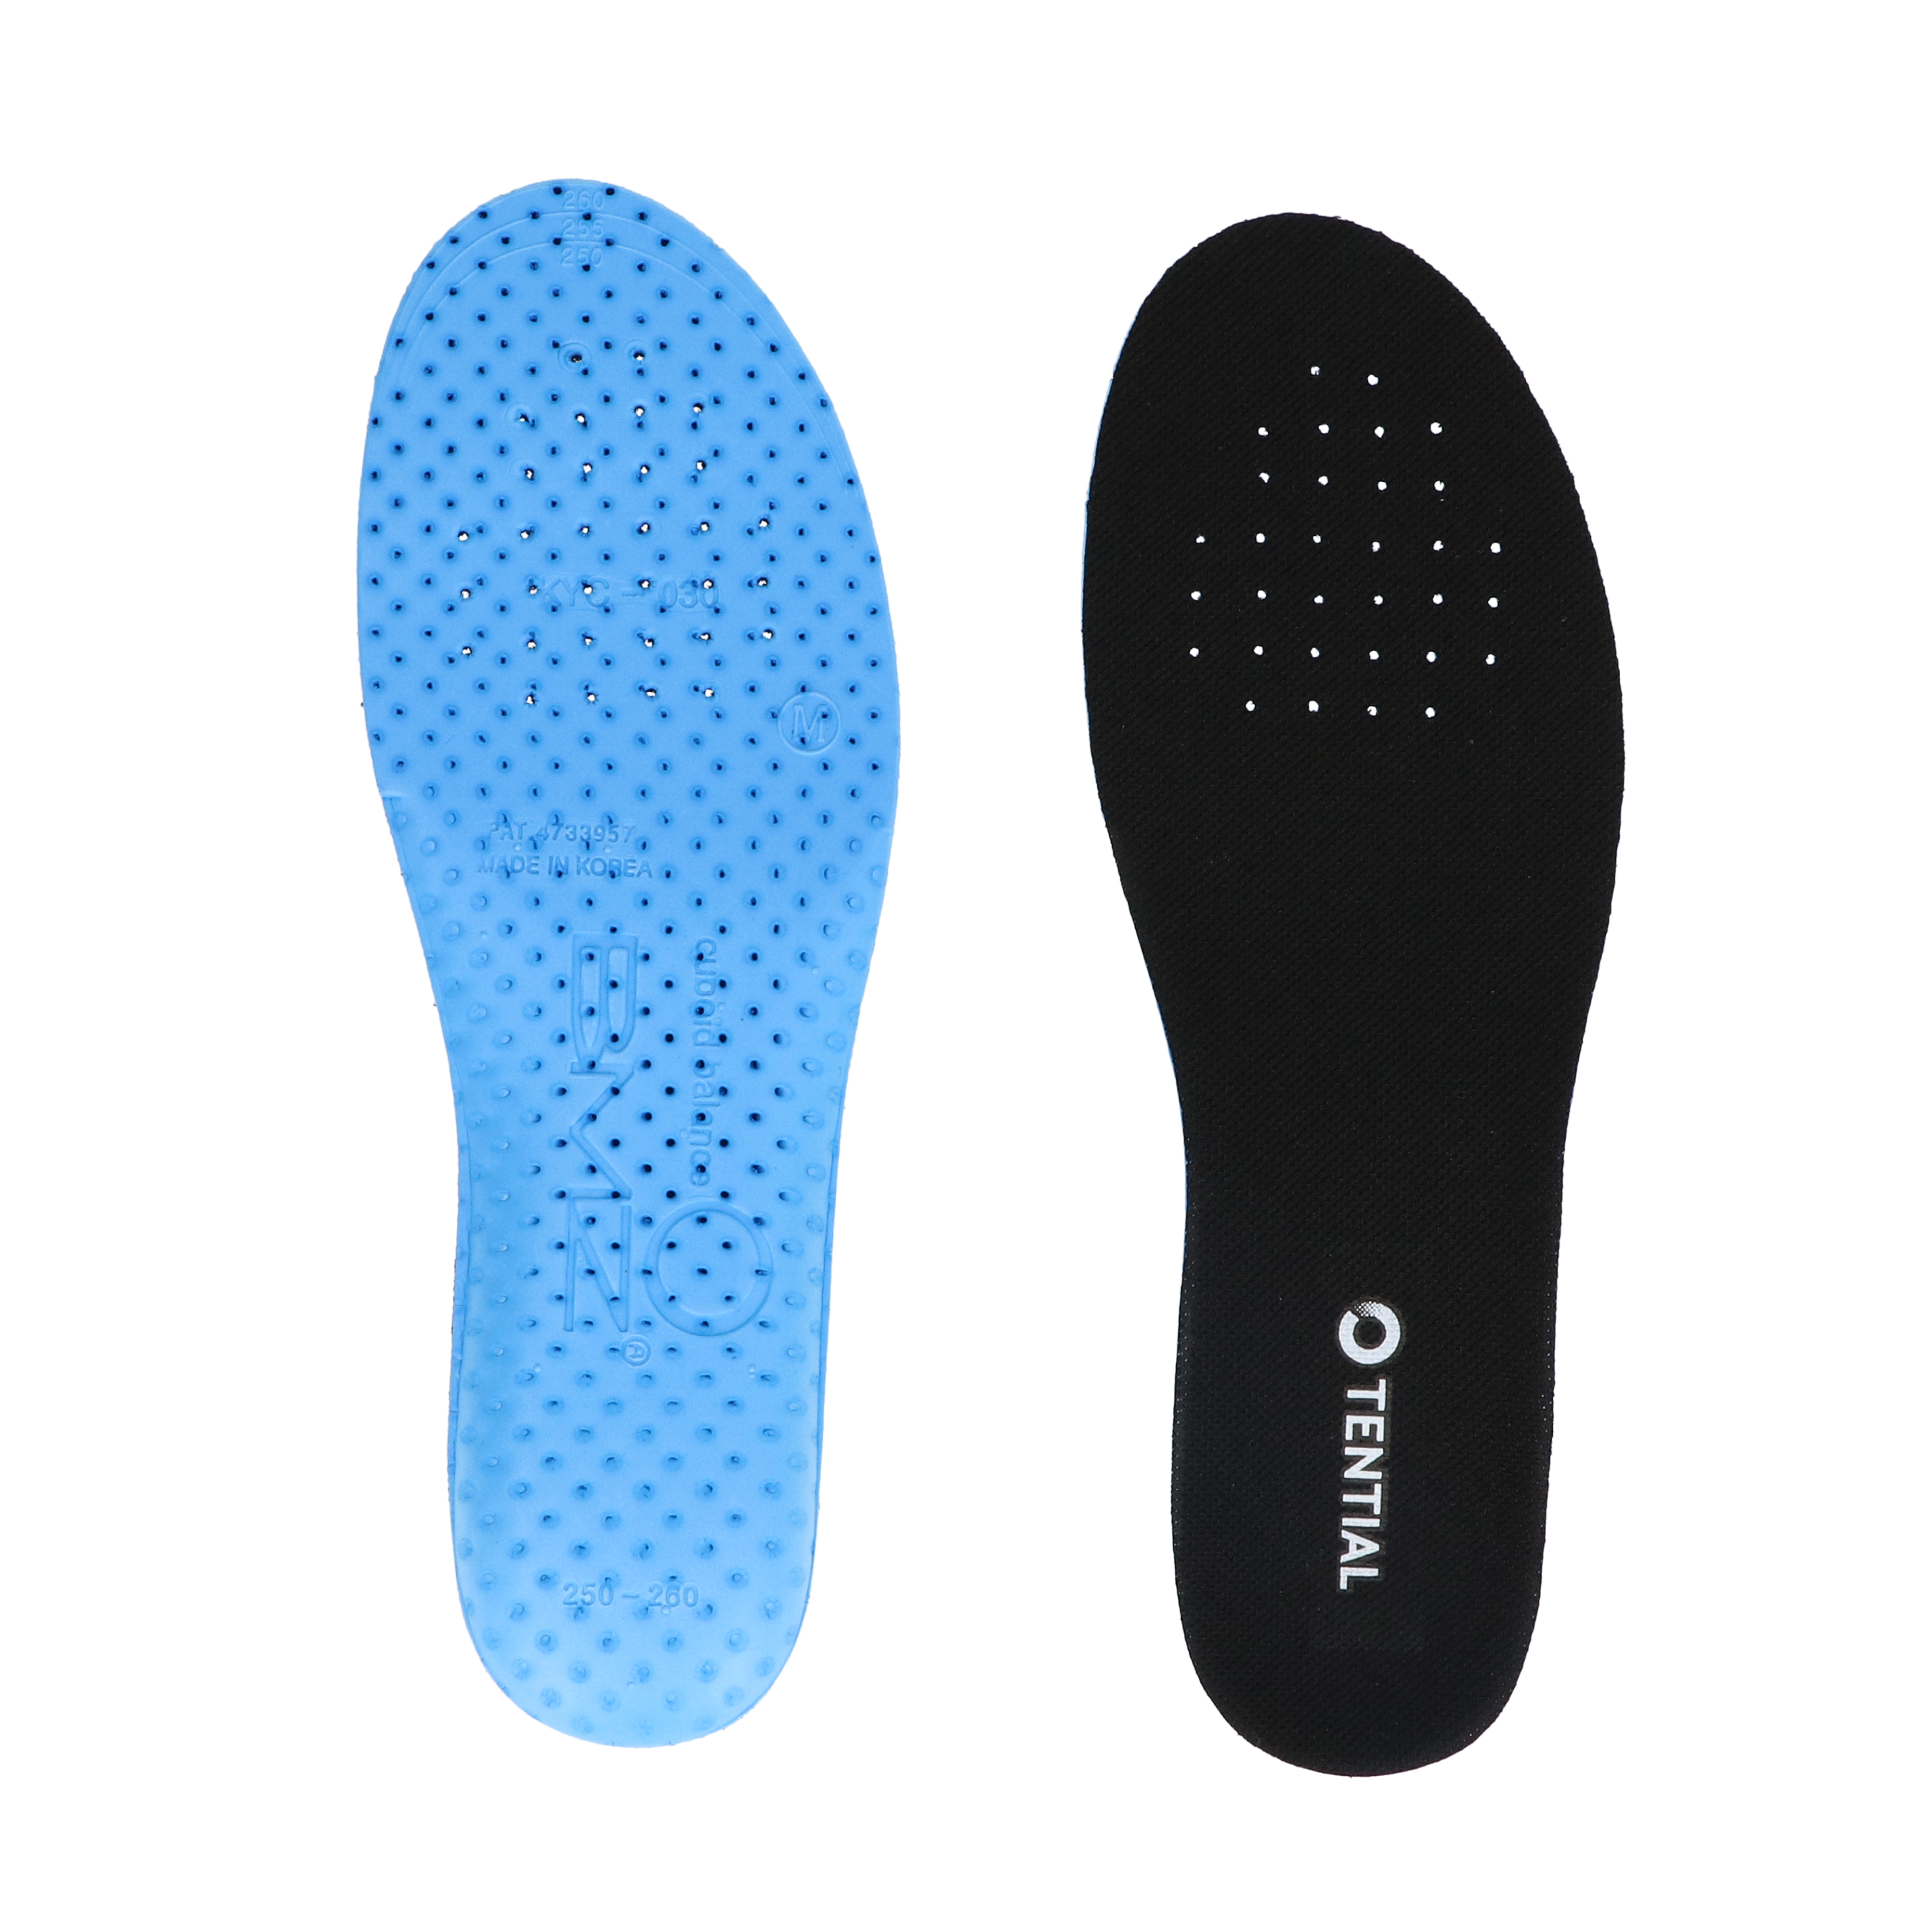 TENTIAL INSOLE Liteを全52商品と比較！口コミや評判を実際に使ってレビューしました！ | mybest